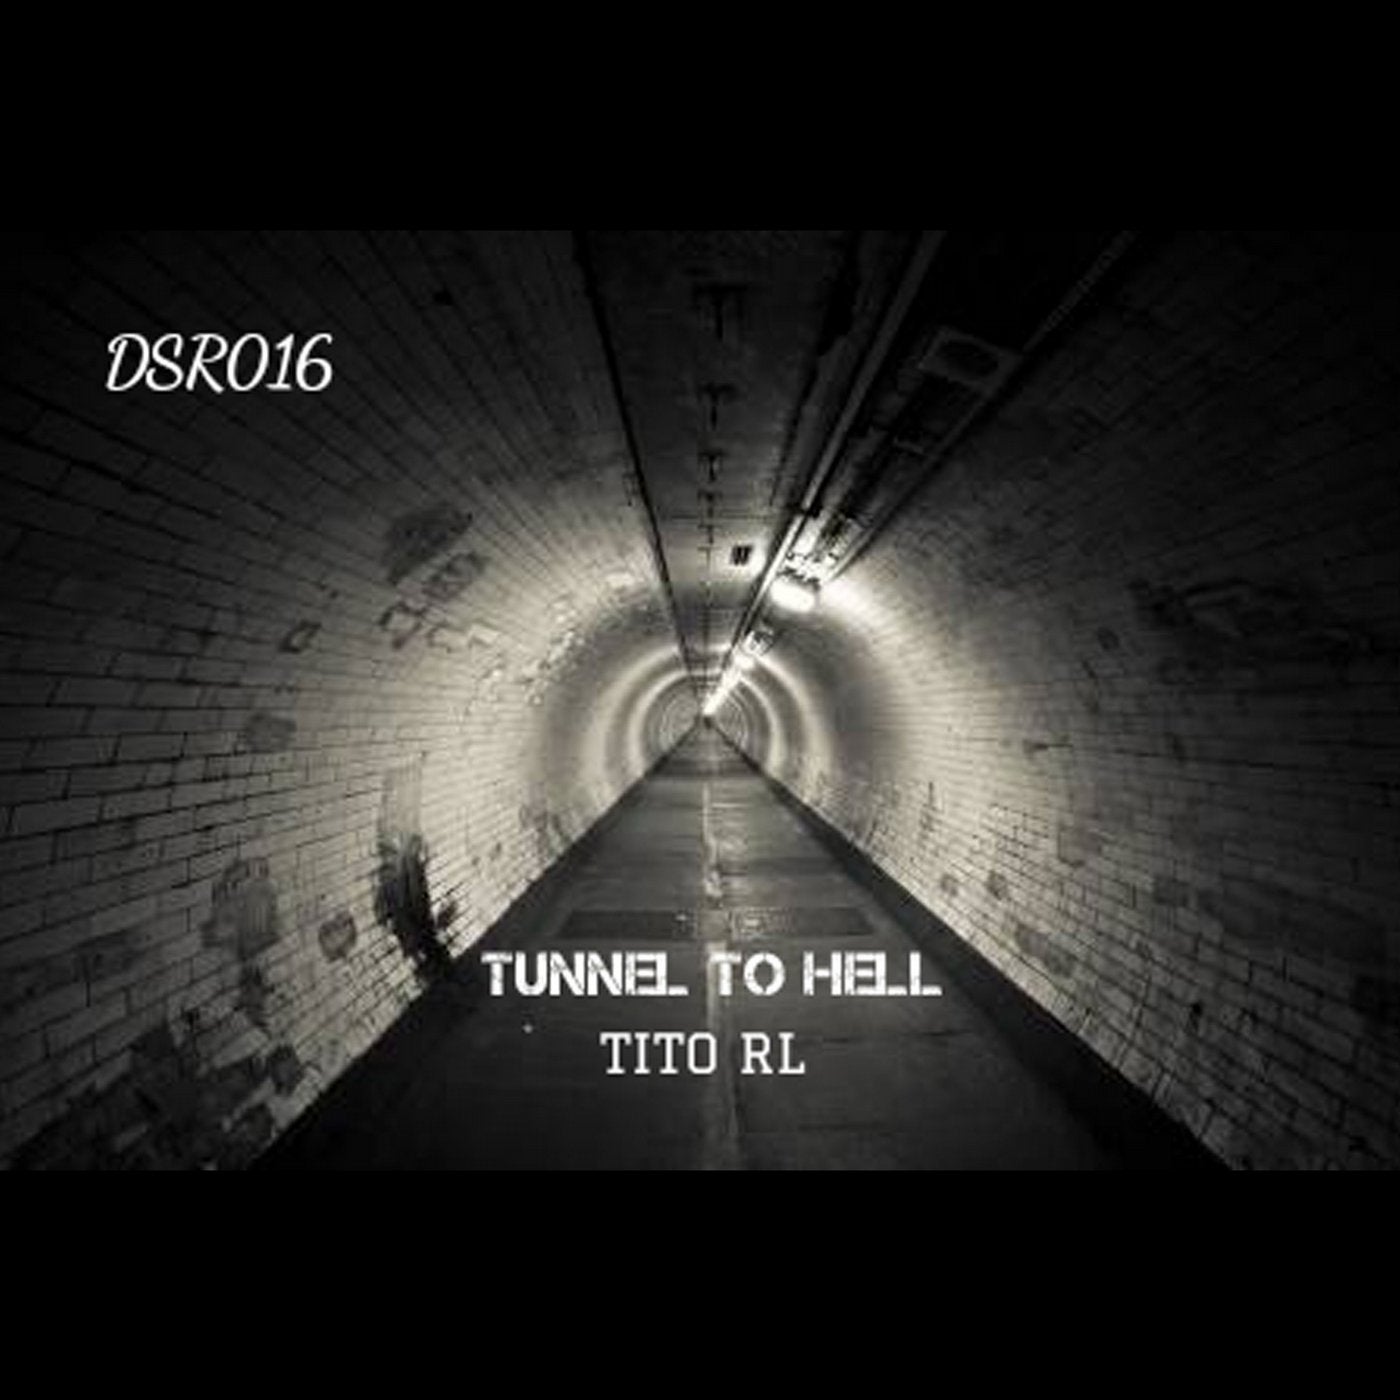 Tunnel to Hell